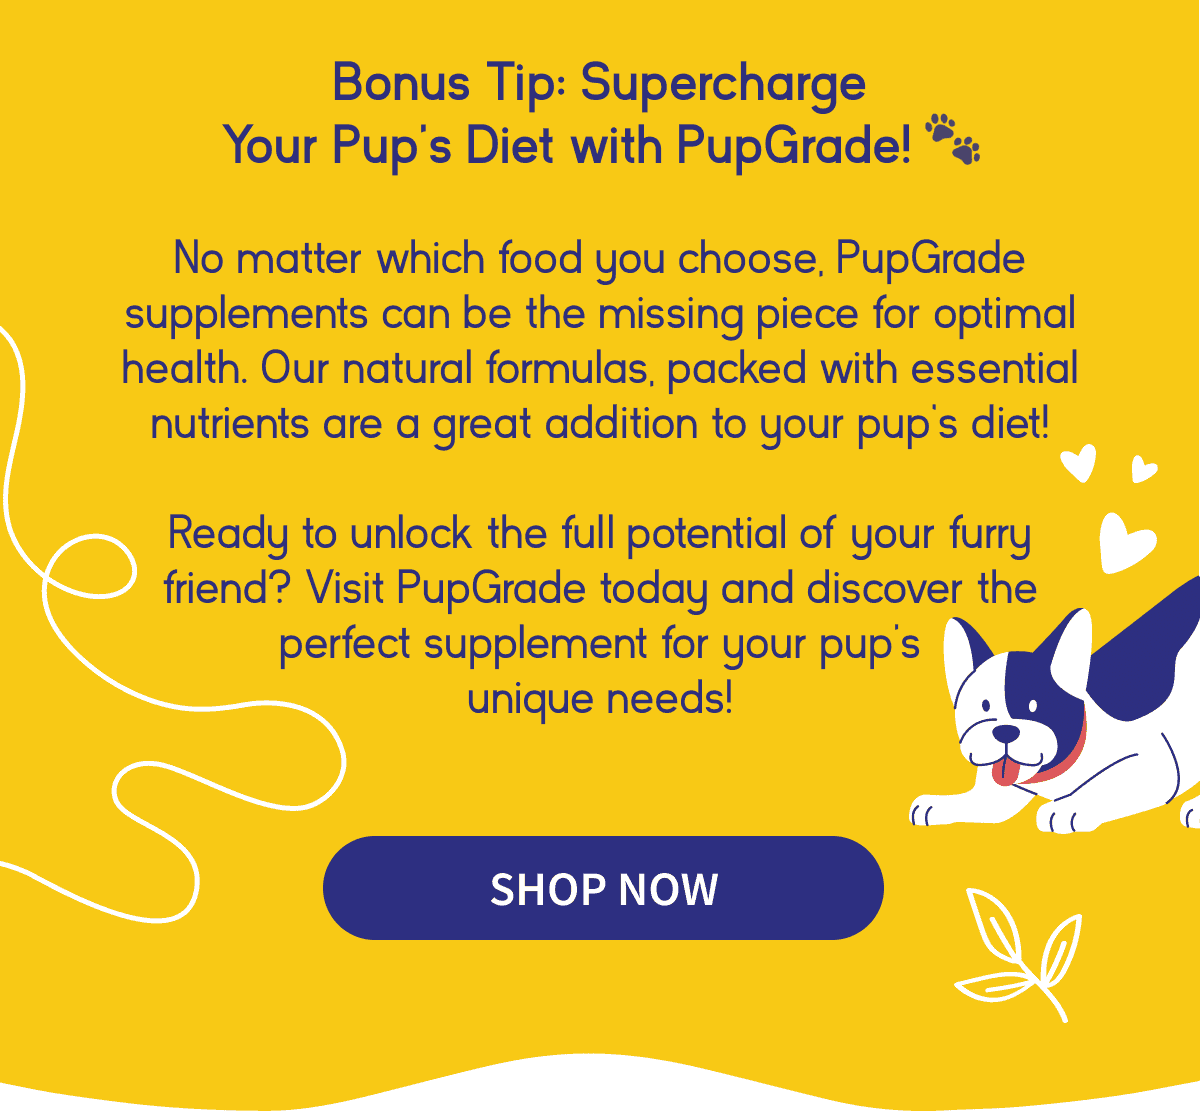 Supercharge your pup's diet with PupGrade!